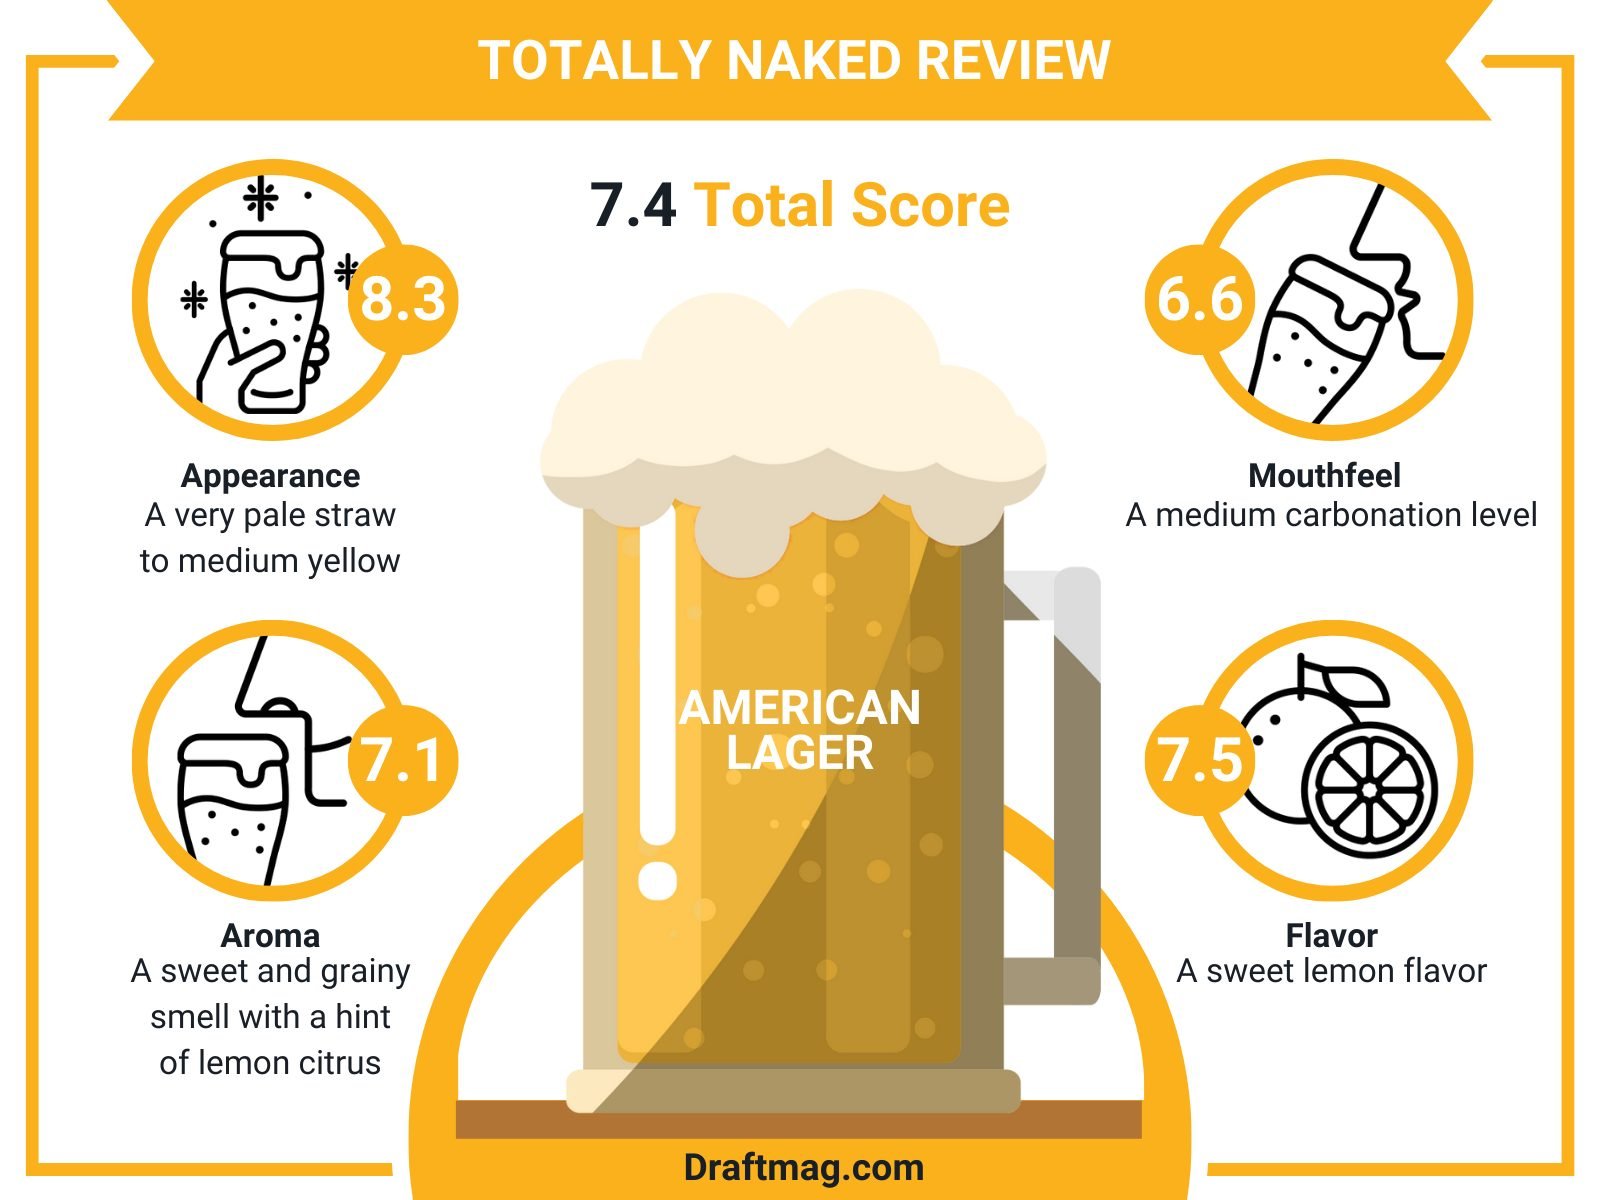 Totally Naked Review Infographic